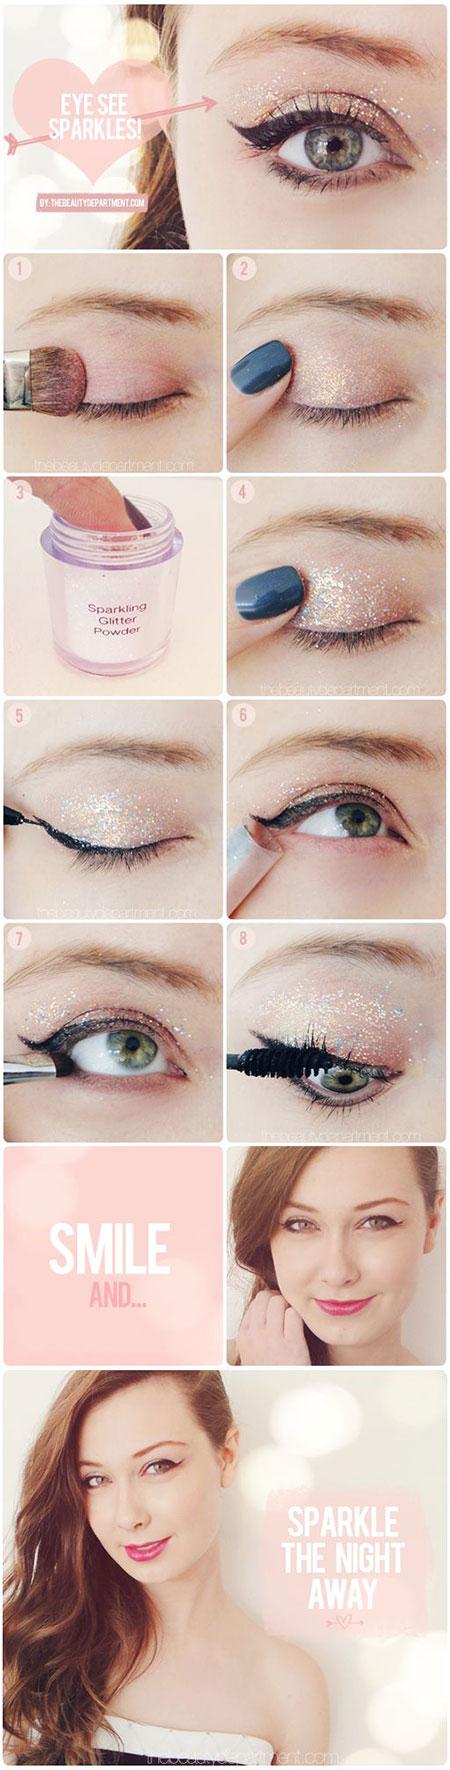 makeup-for-beginners-step-by-step-16_7 Make-up voor beginners stap voor stap